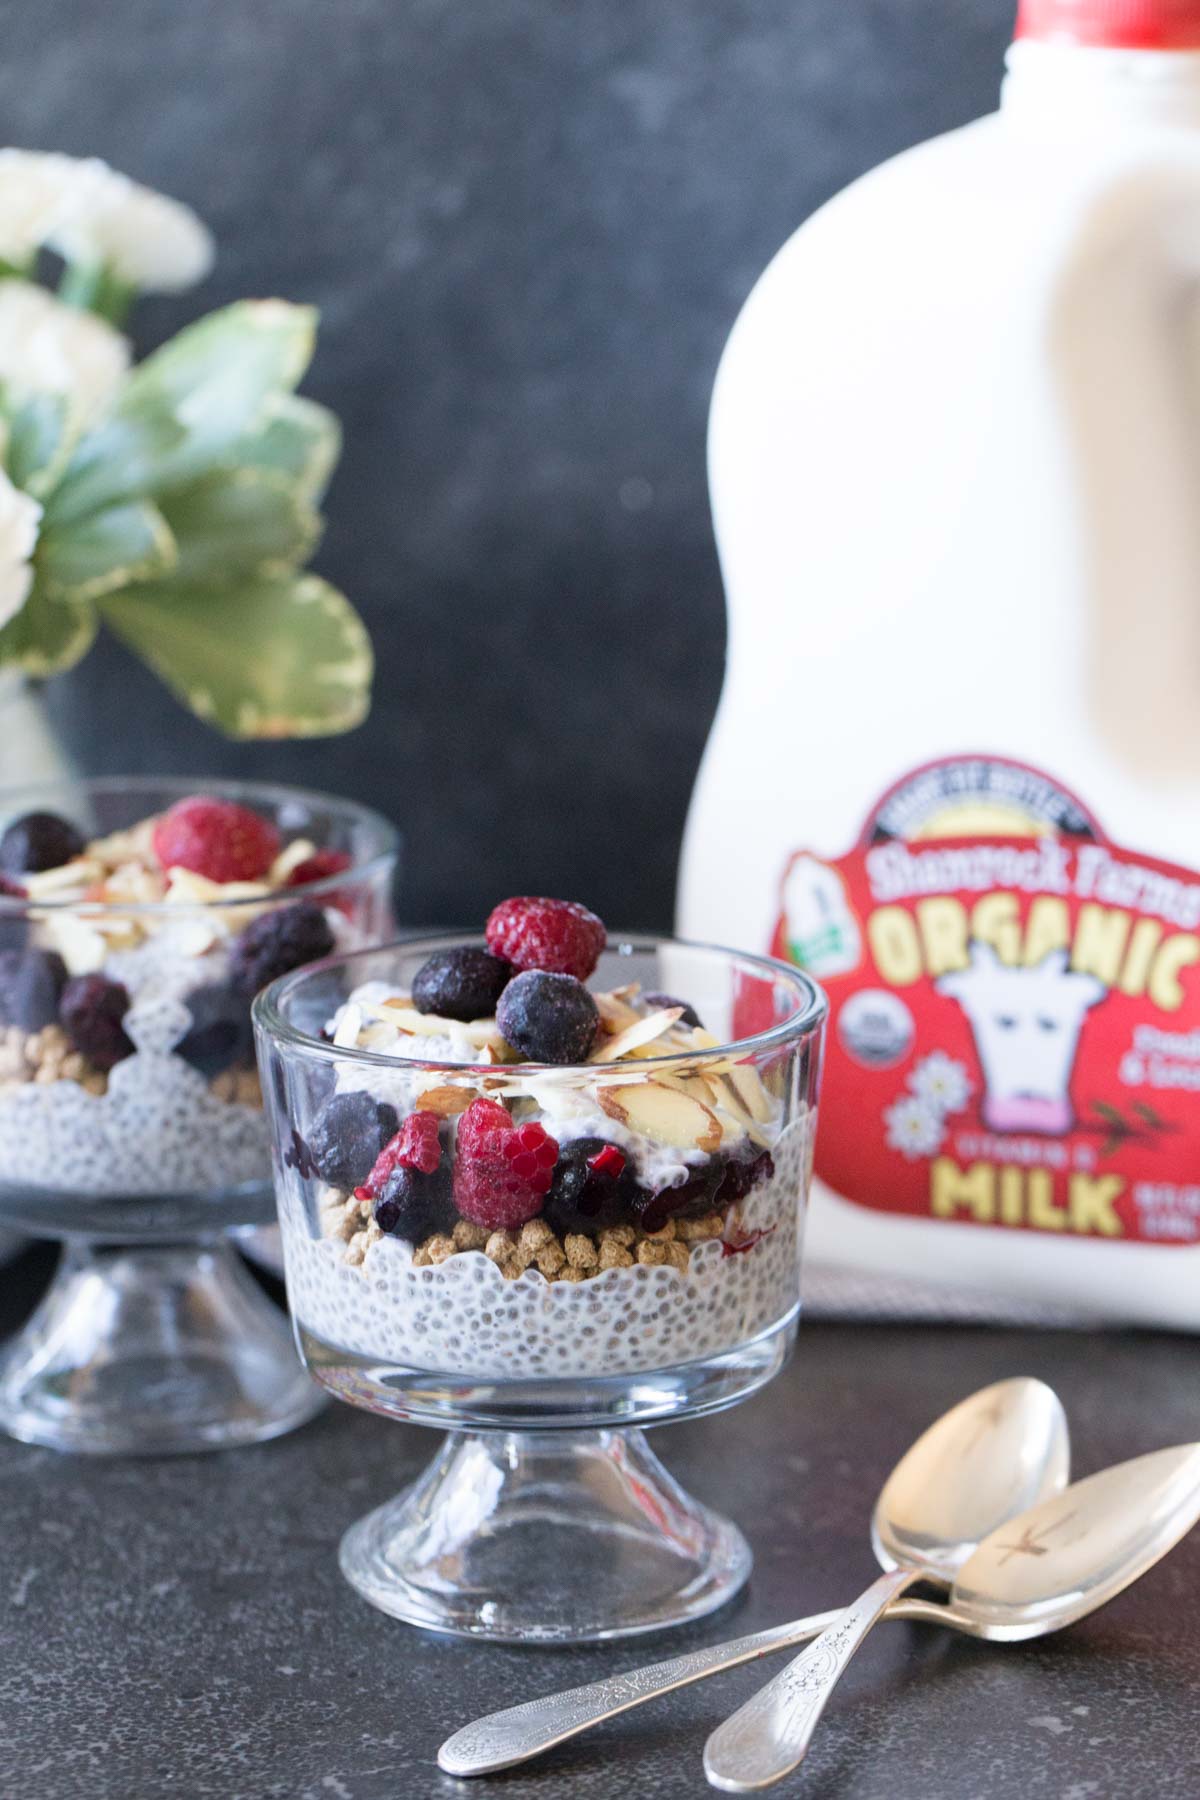 Chia Pudding Parfaits assembled in two small glass dishes, with two spoons next to them and a milk jug in the background. 